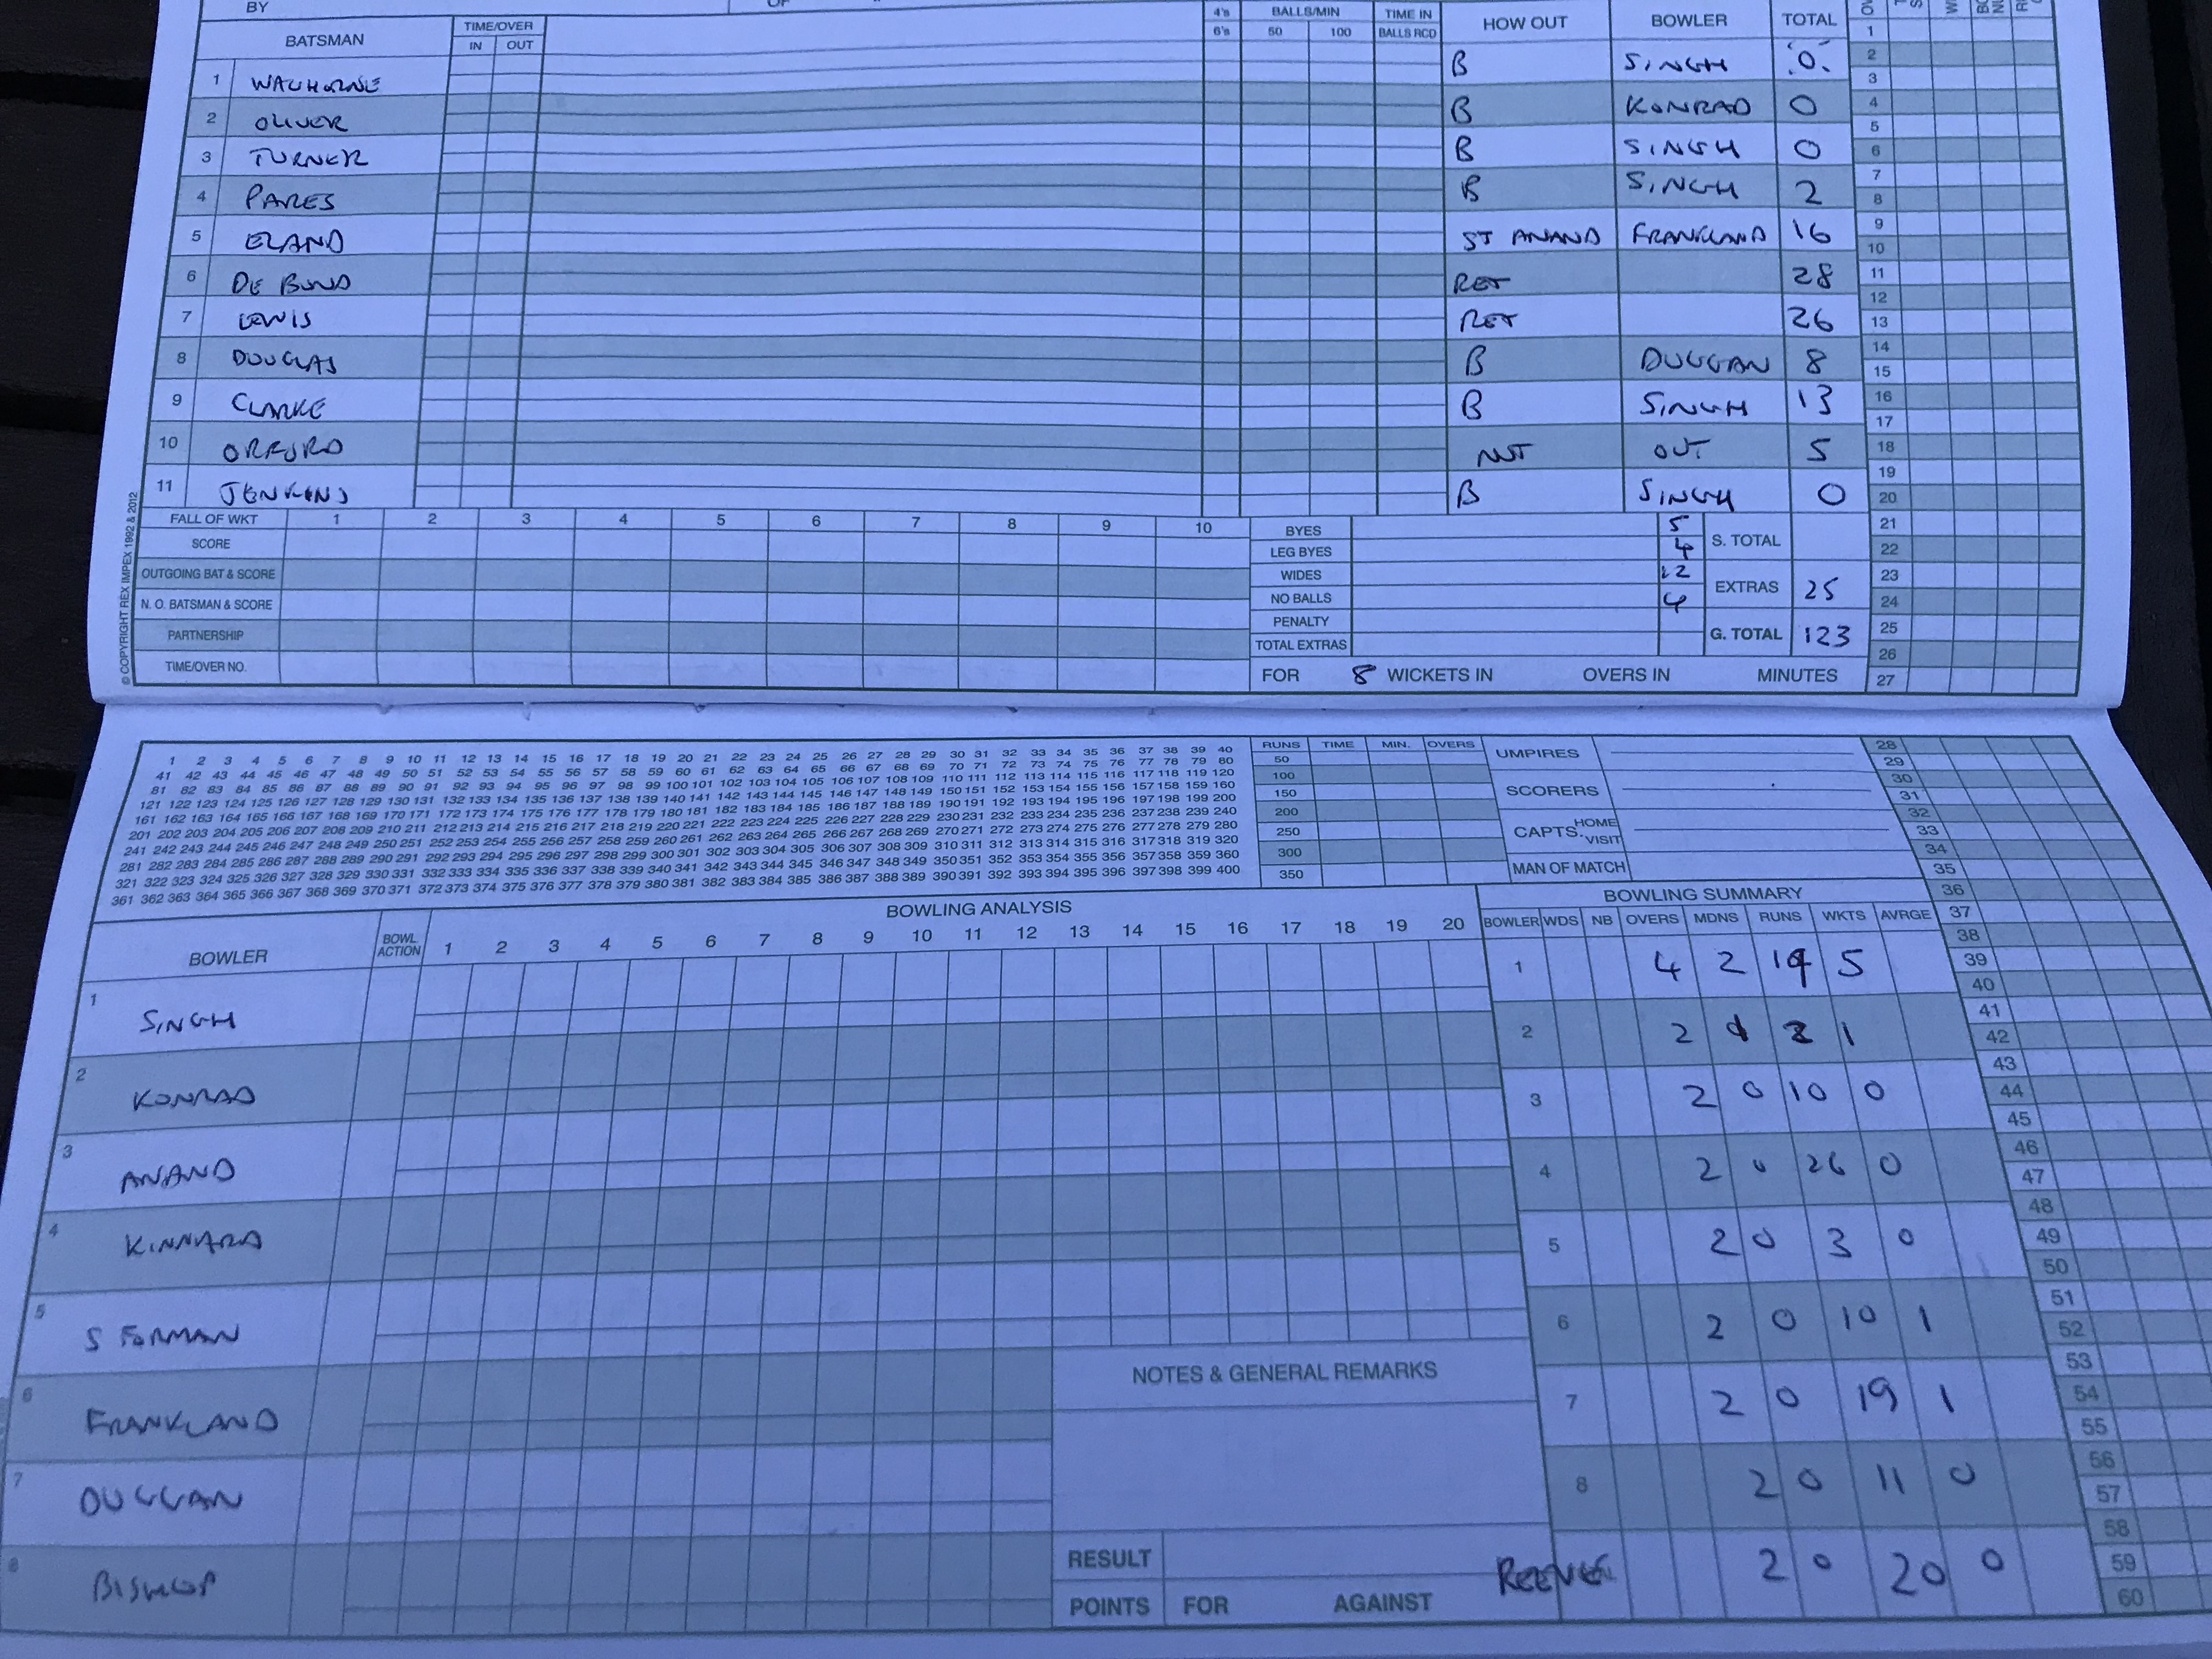 Match Two - 1st Innings